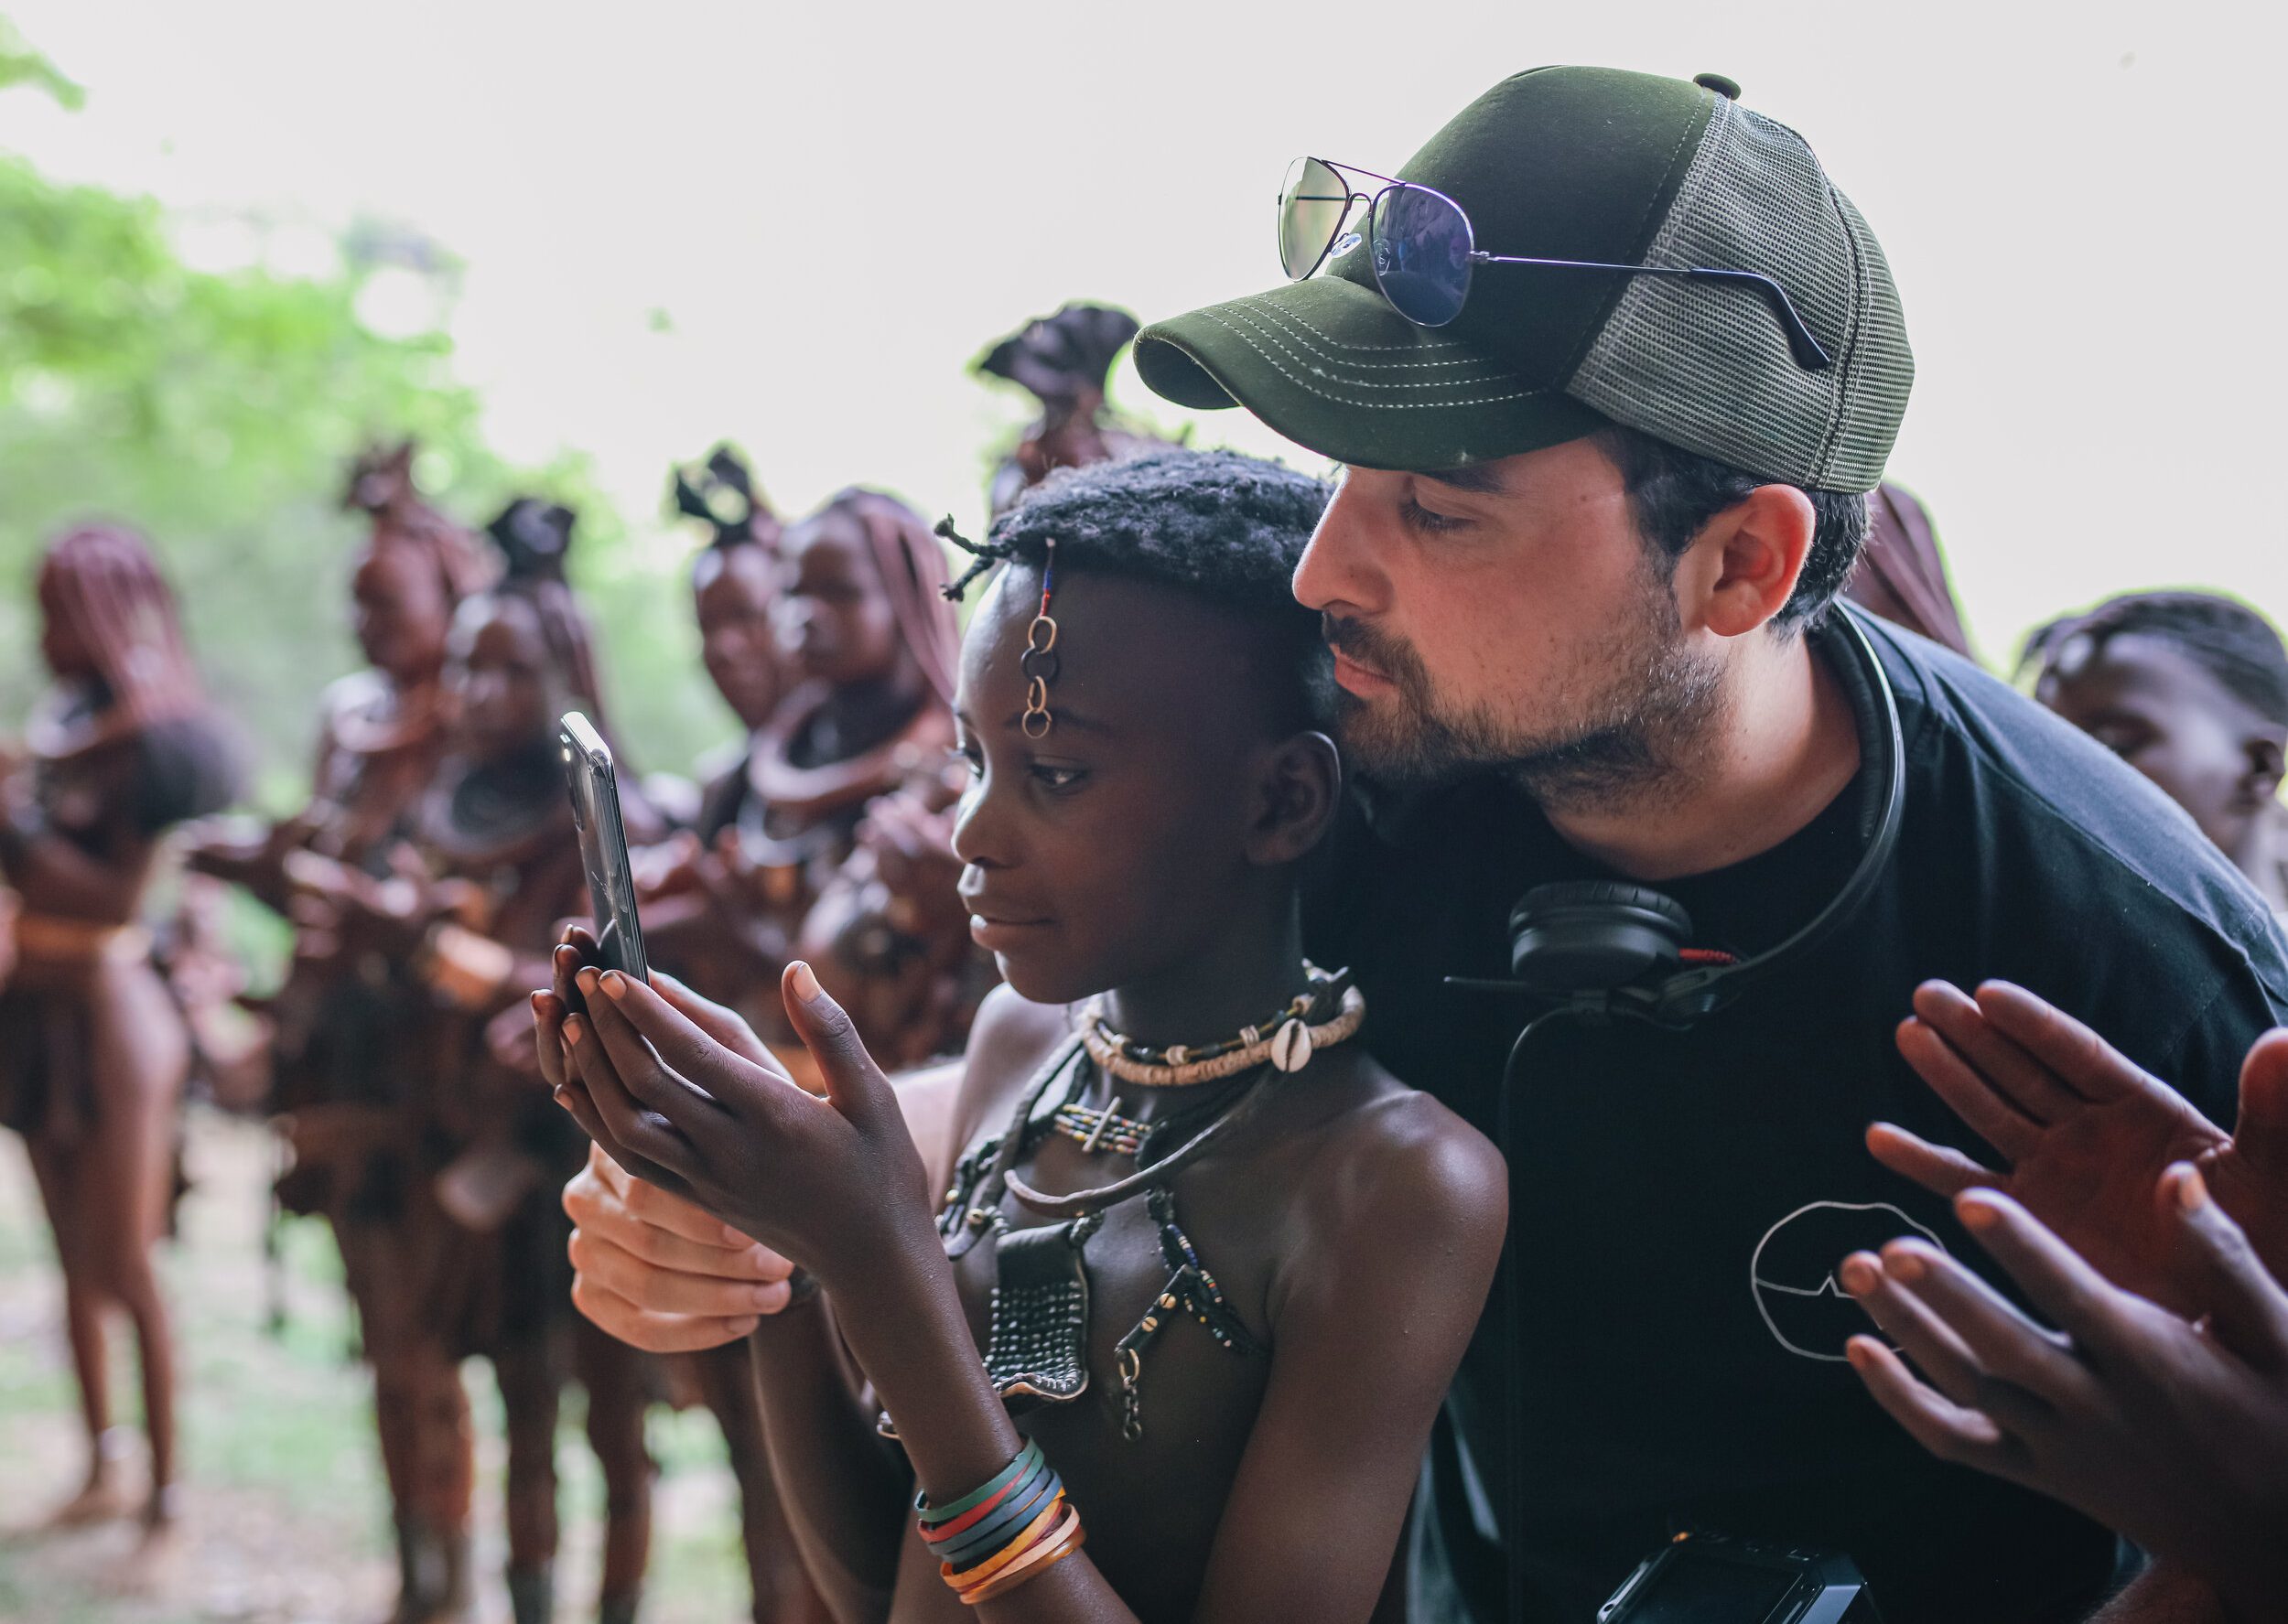 How the IVE Experience Introduces Electronic Raves To Remote African Tribes For The First Time in History